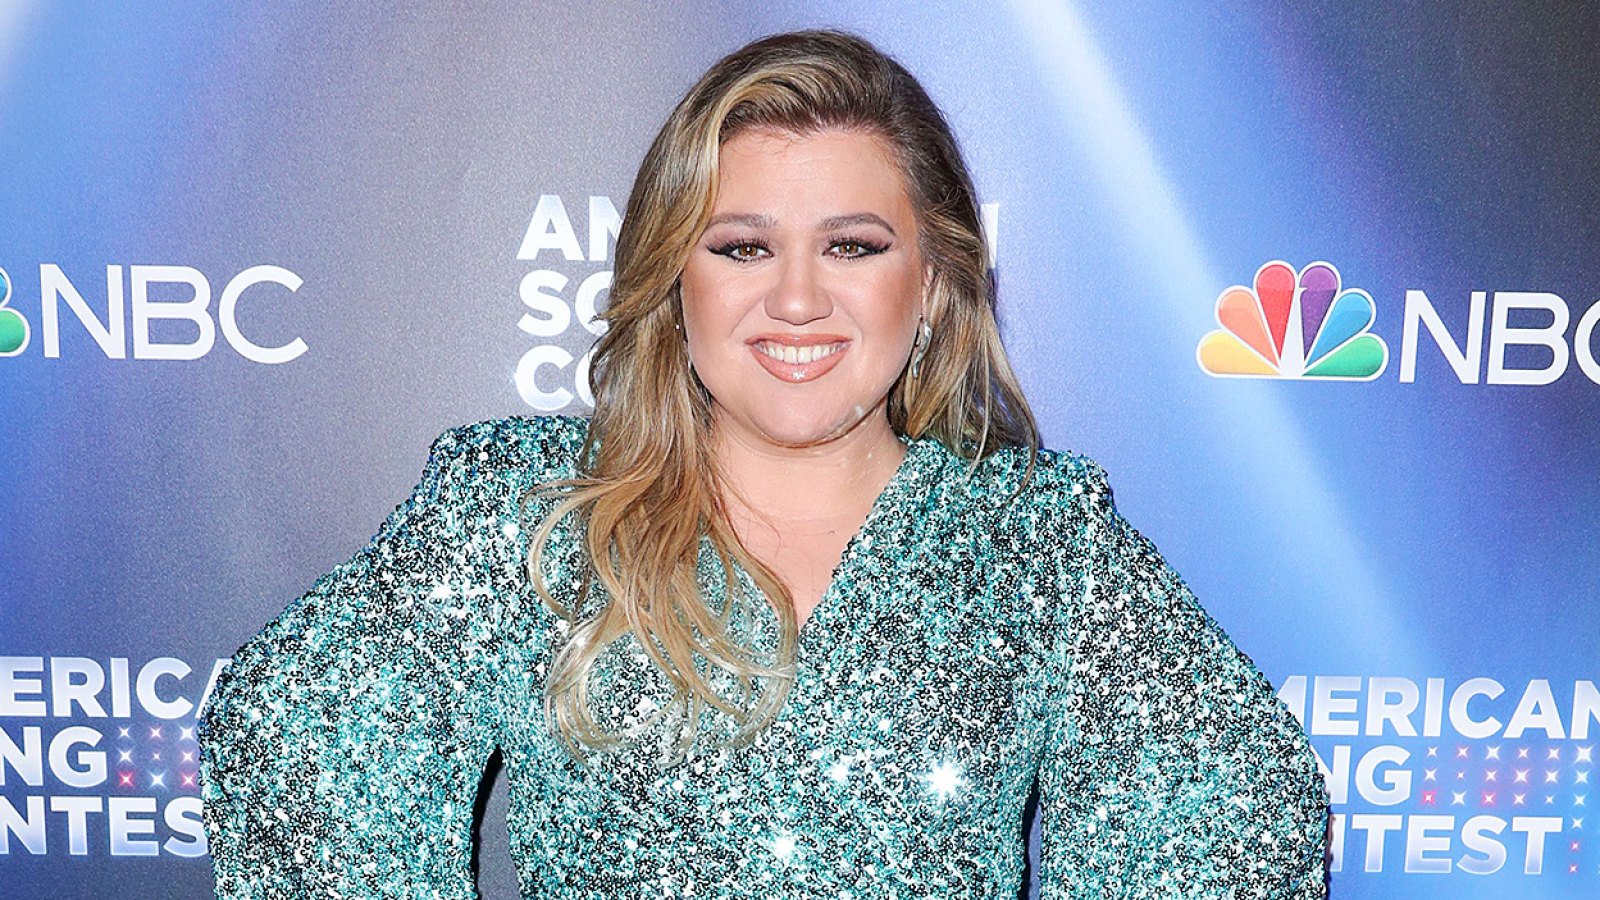 Who Is Kelly Clarkson's Piece By Piece About? The Emotional Song